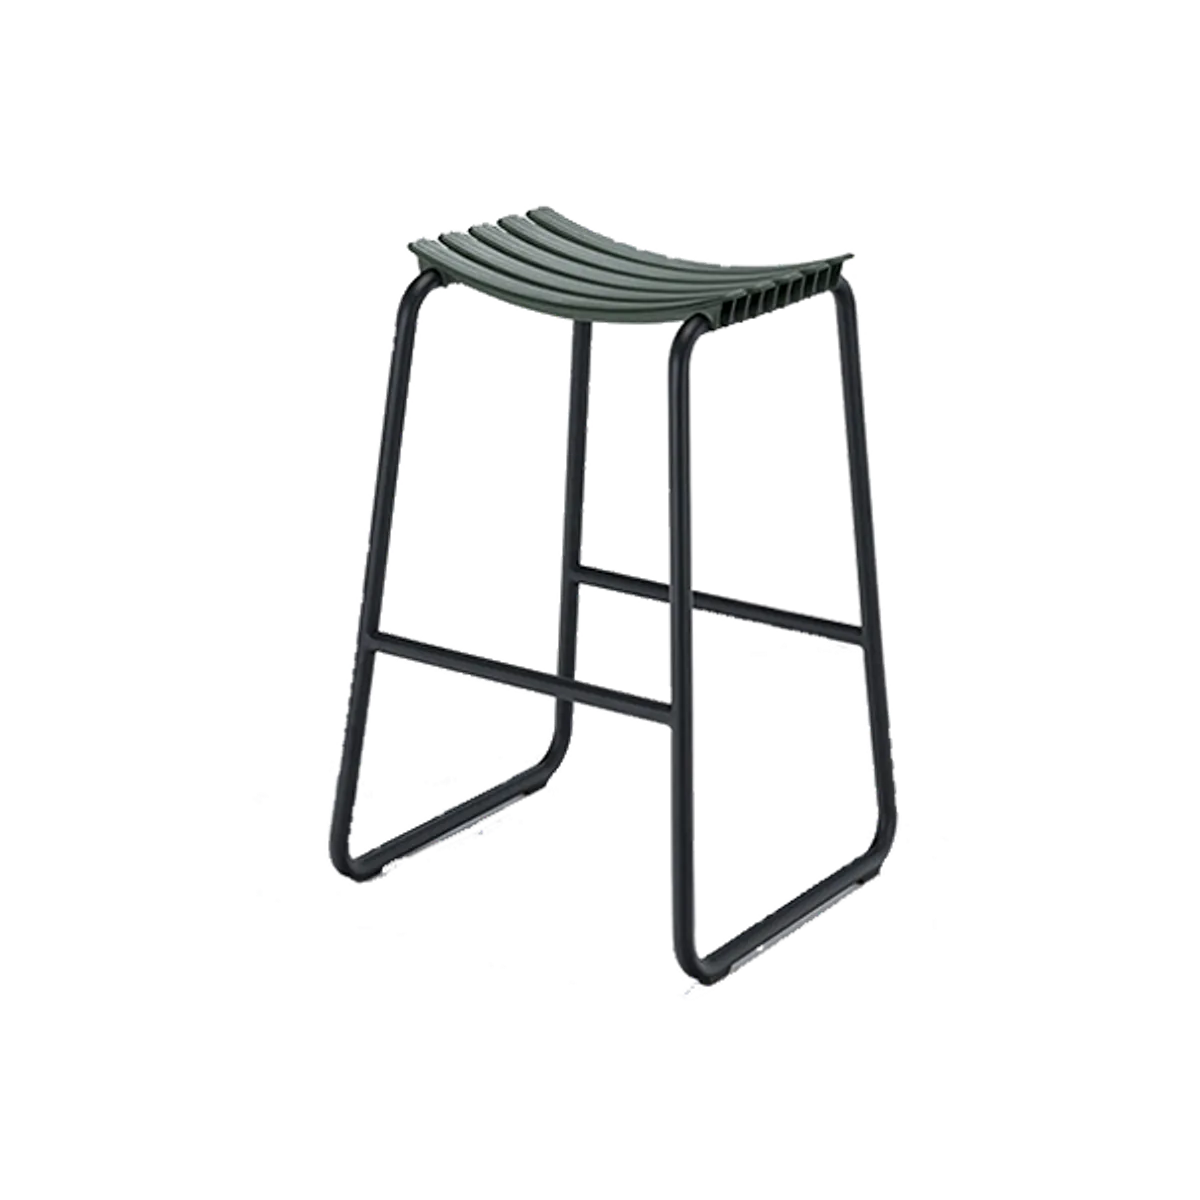 Web Snip Stool Outdoor Metal And Plastic Furniture For Hotels And Cafes 033